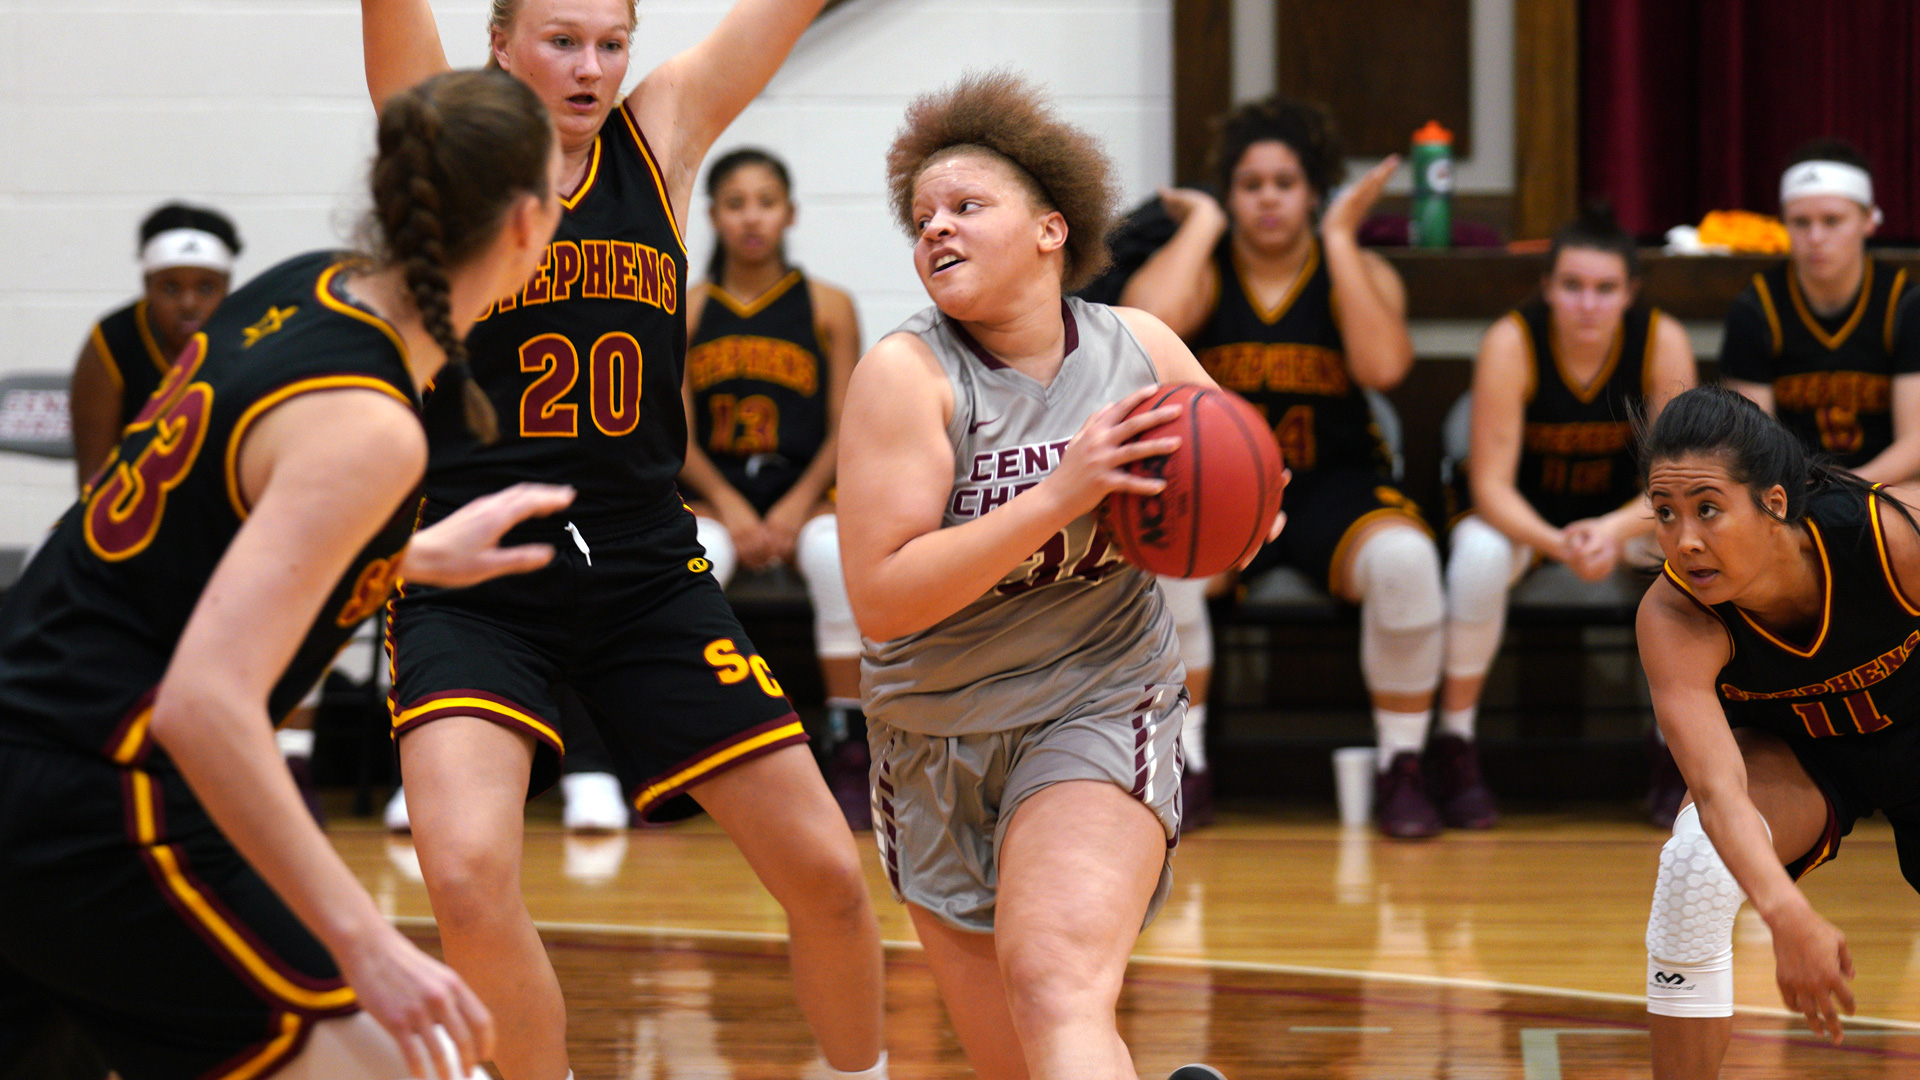 CCCB freshman Ta'Lor Branch scored 10 points and grabbed eight rebounds in the Saints' 86-79 win over Lincoln Christian University on Tuesday.